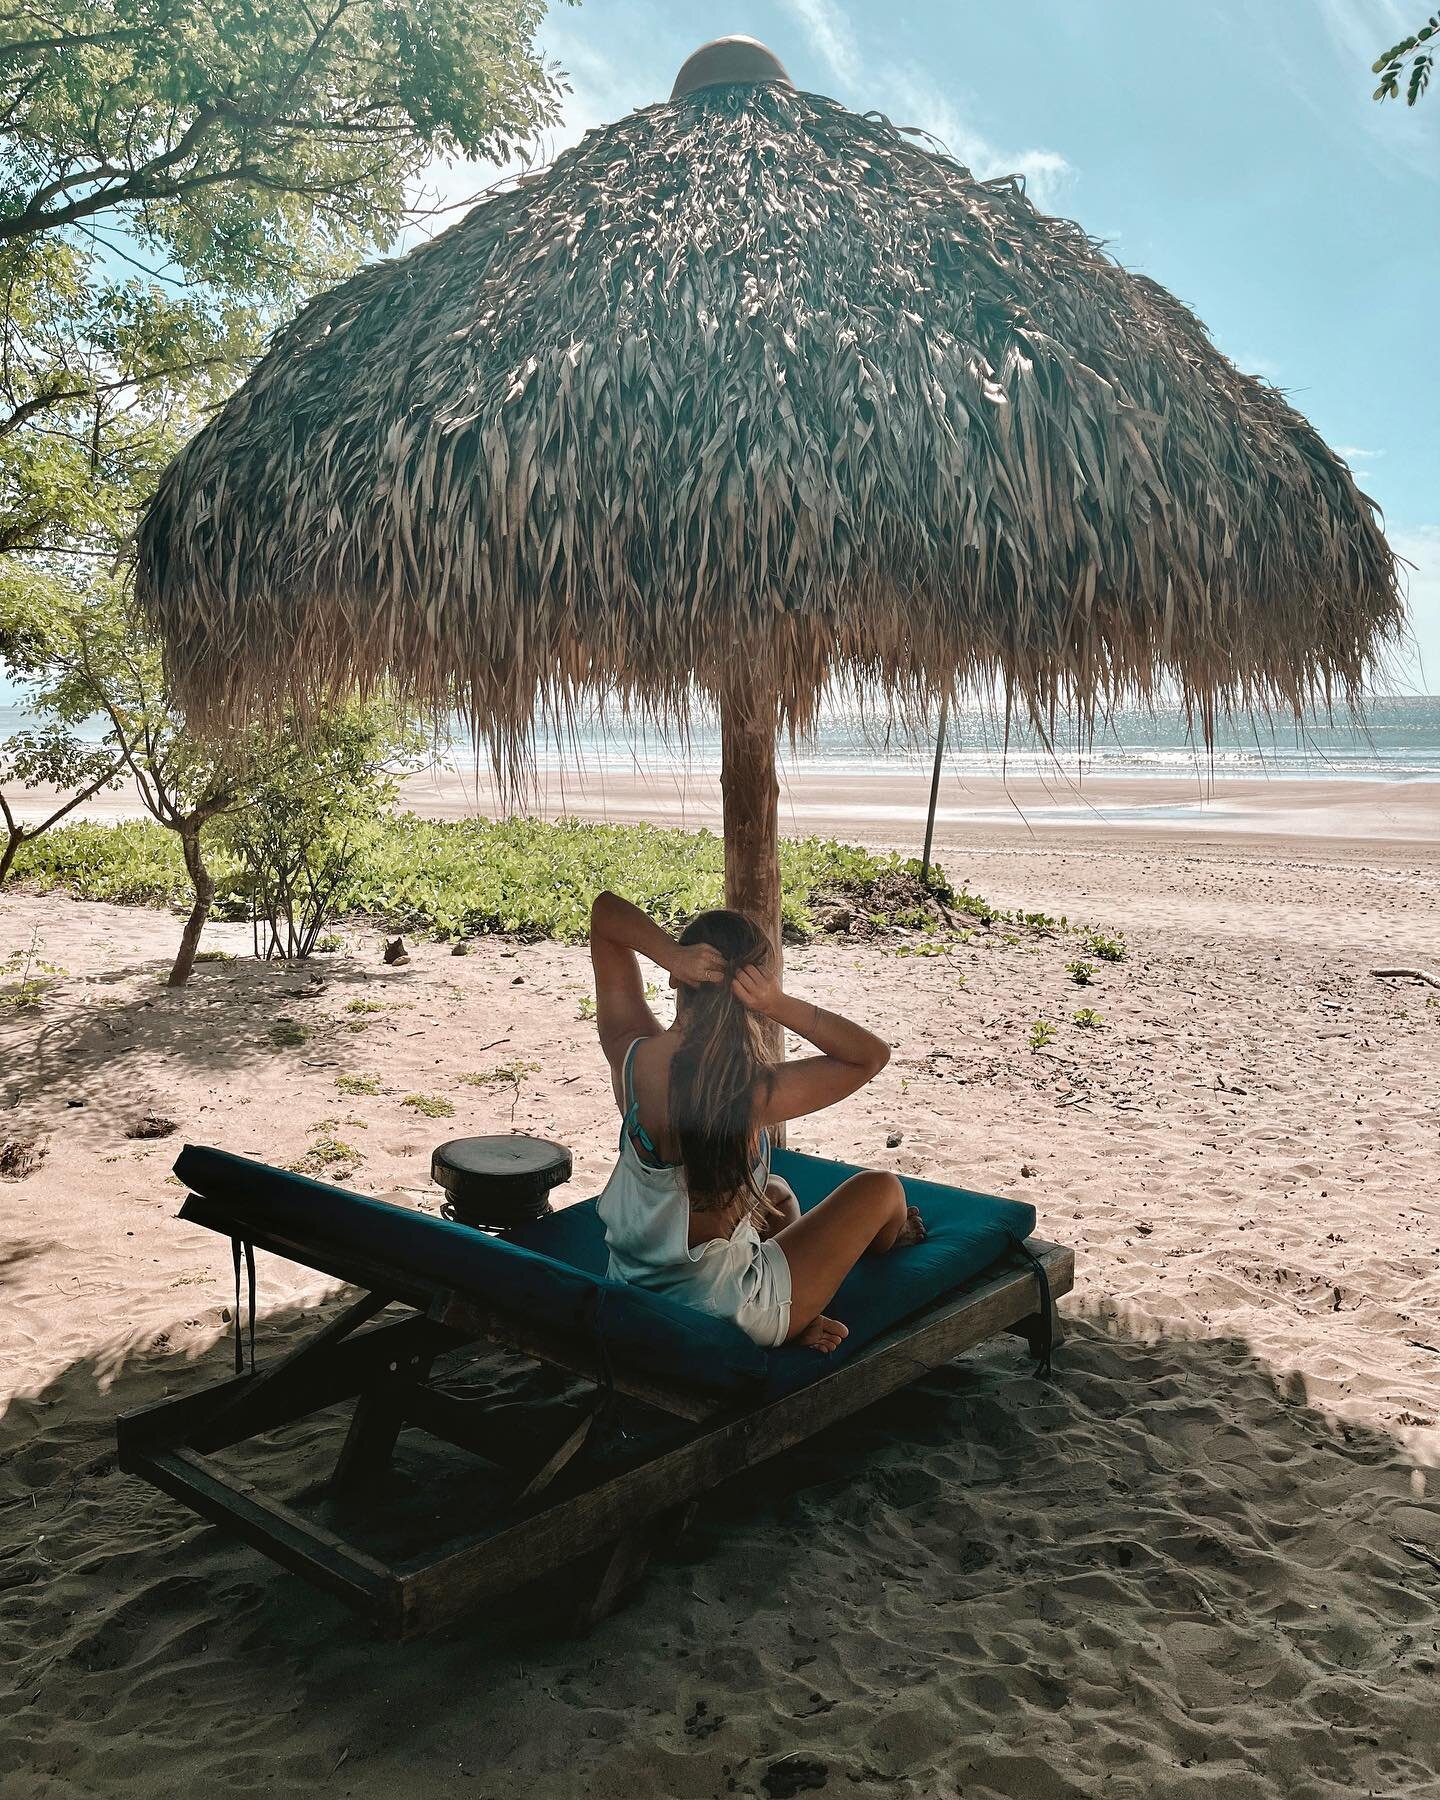 Livin&rsquo;s easy when you&rsquo;re retreating 💛

Only three spaces left for our November retreat in Nicaragua 🌞

Join us to Align &amp; Shine ✨🦋

November 11-17th, 2023
Southern Nicaragua
Private Queen Casitas 

DM me for more info or follow my 